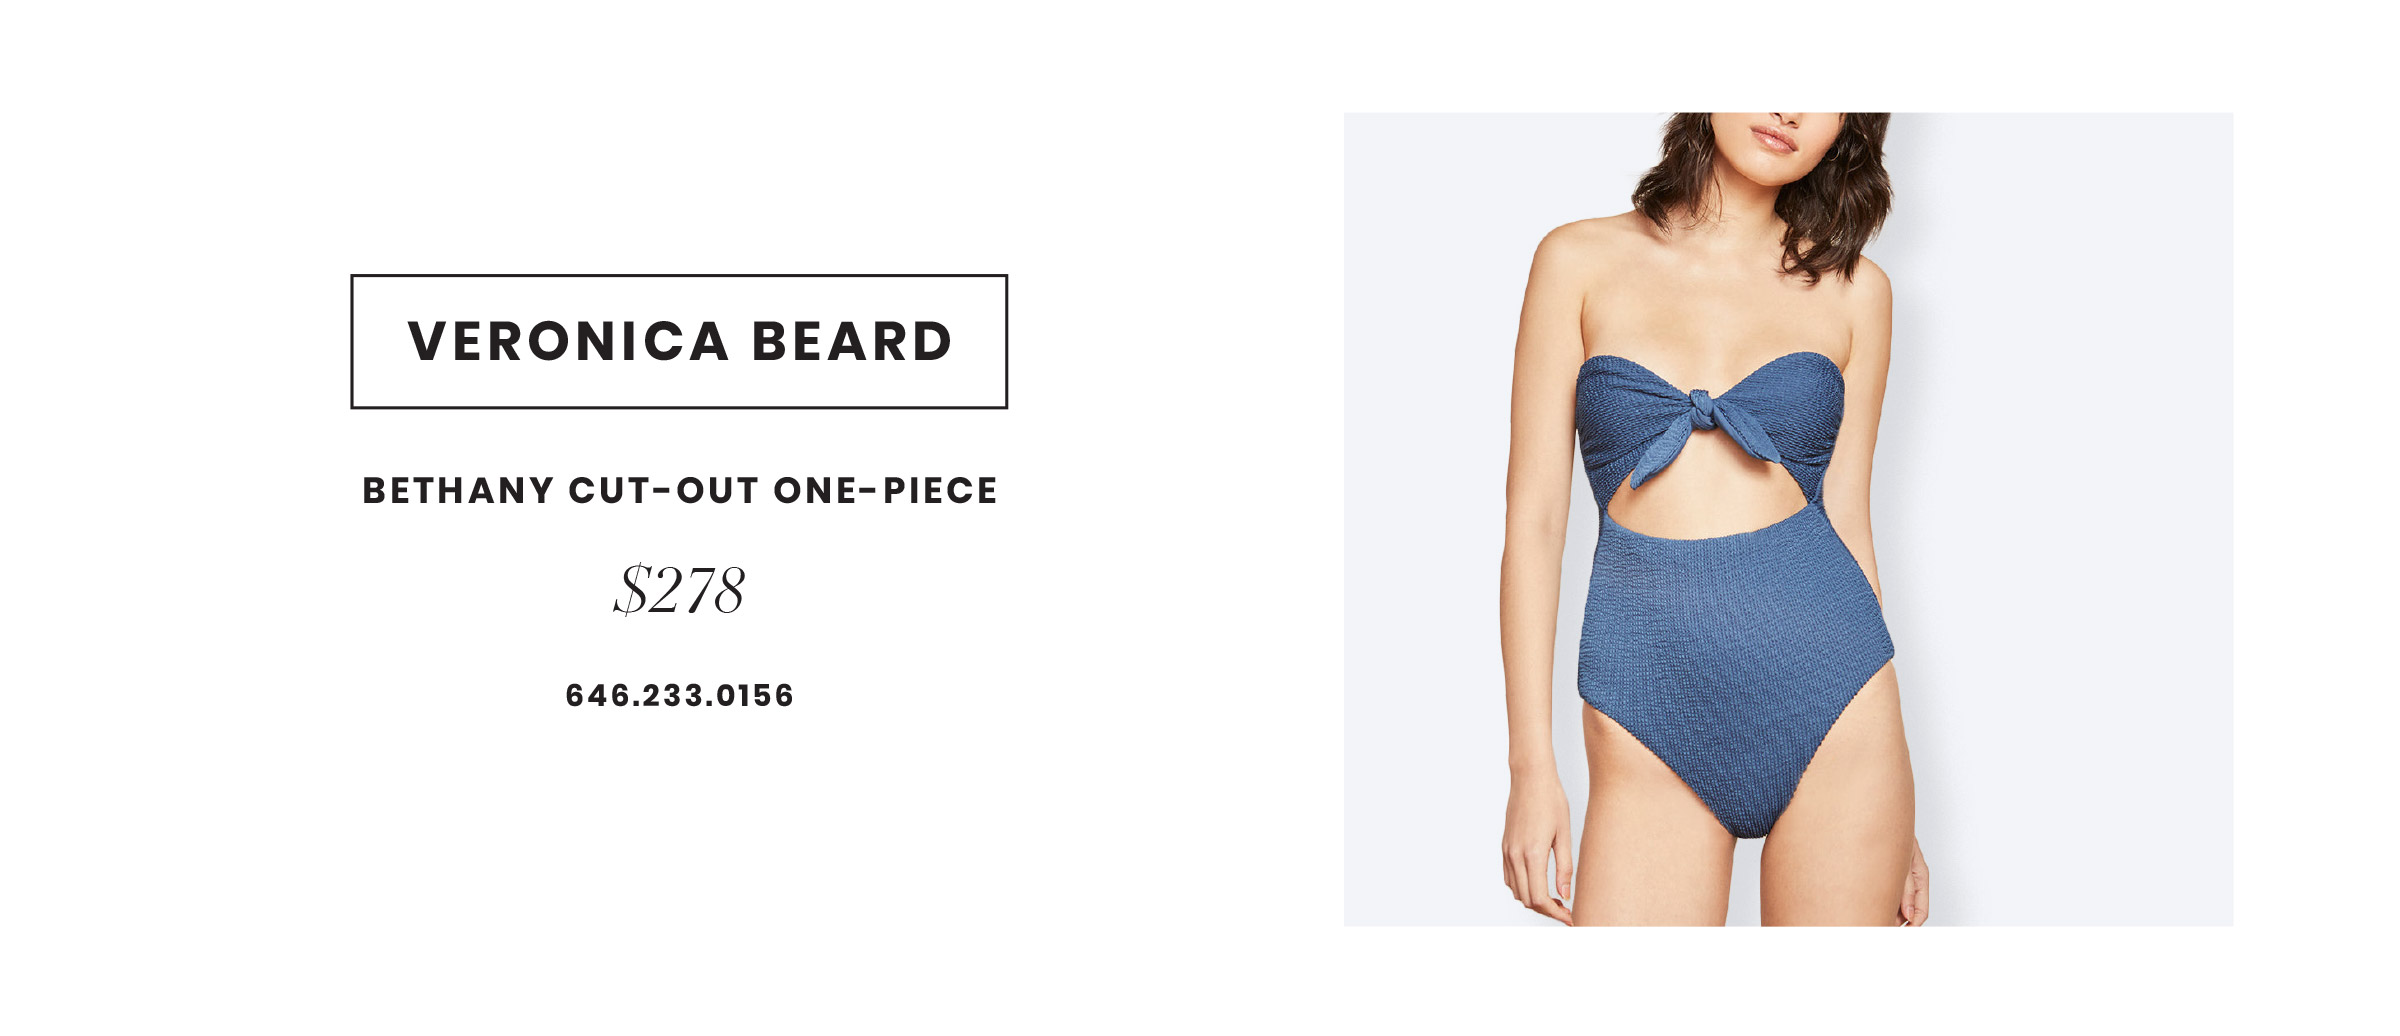 Veronica Beard ribbed strapless cut out one piece swimsuit